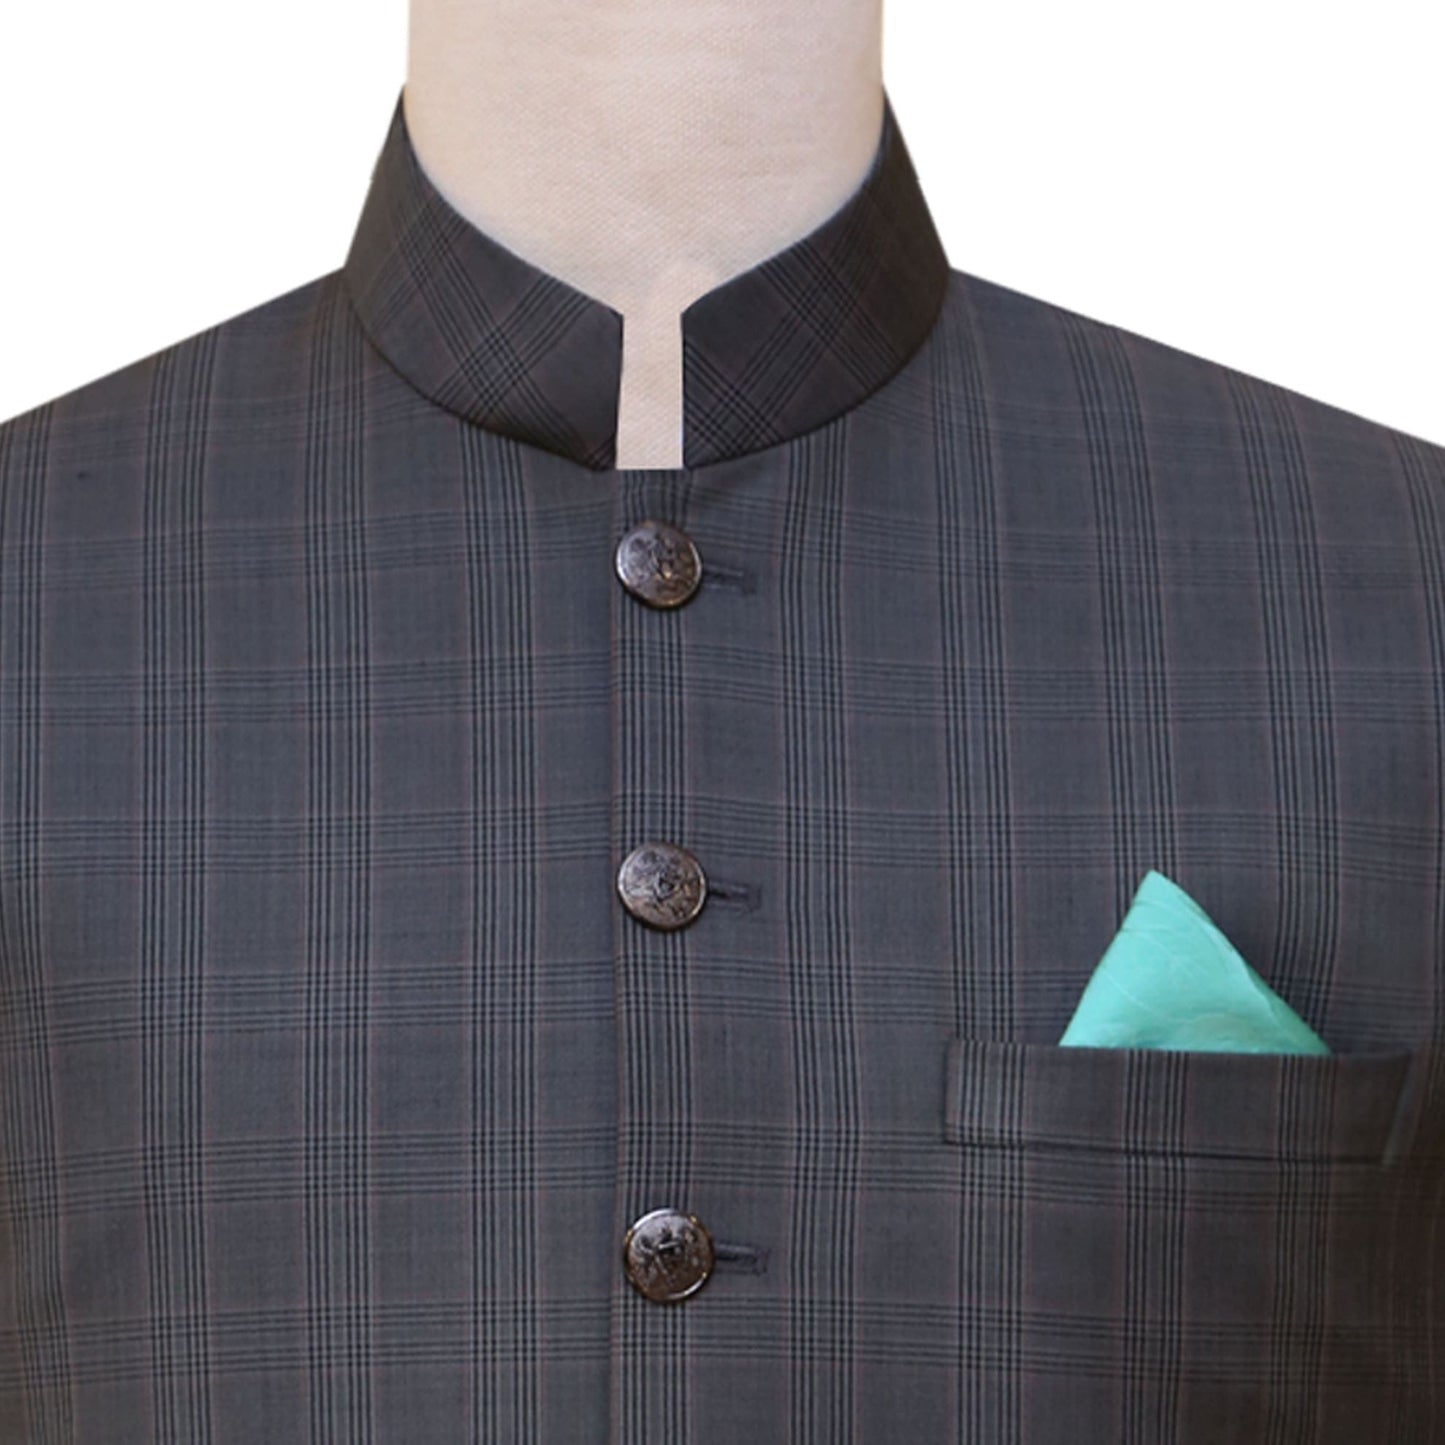 Tropical gray check fabric waistcoat for sophisticated look